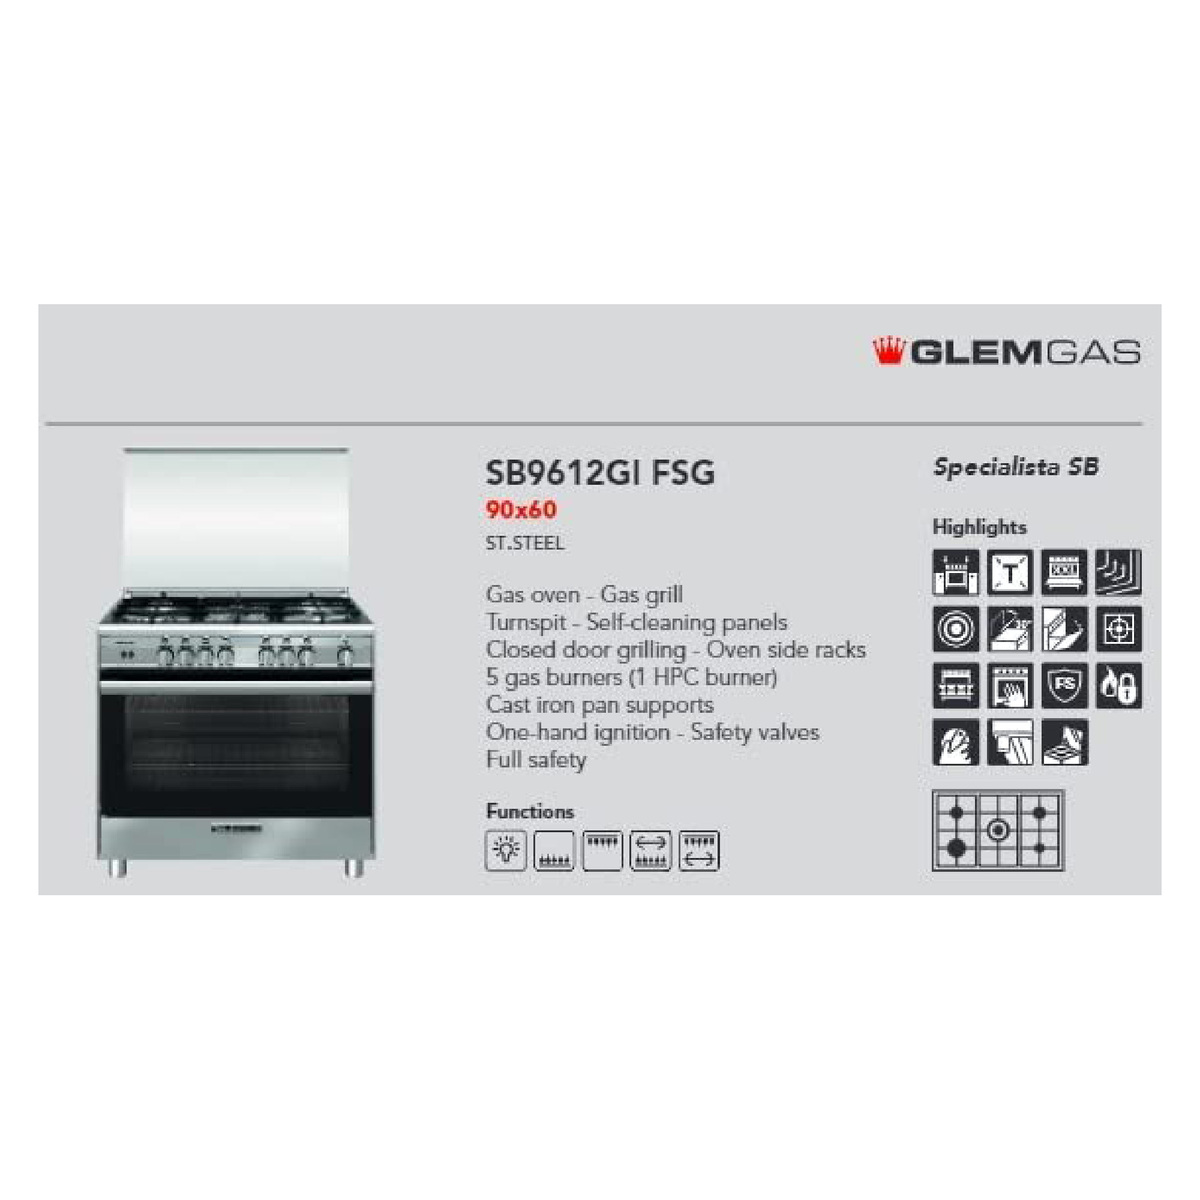 Glemgas Specialista Base Gas Cooking Range With 5 Burners, Stainless Steel, 90X60 cm, SB9612GIFSG